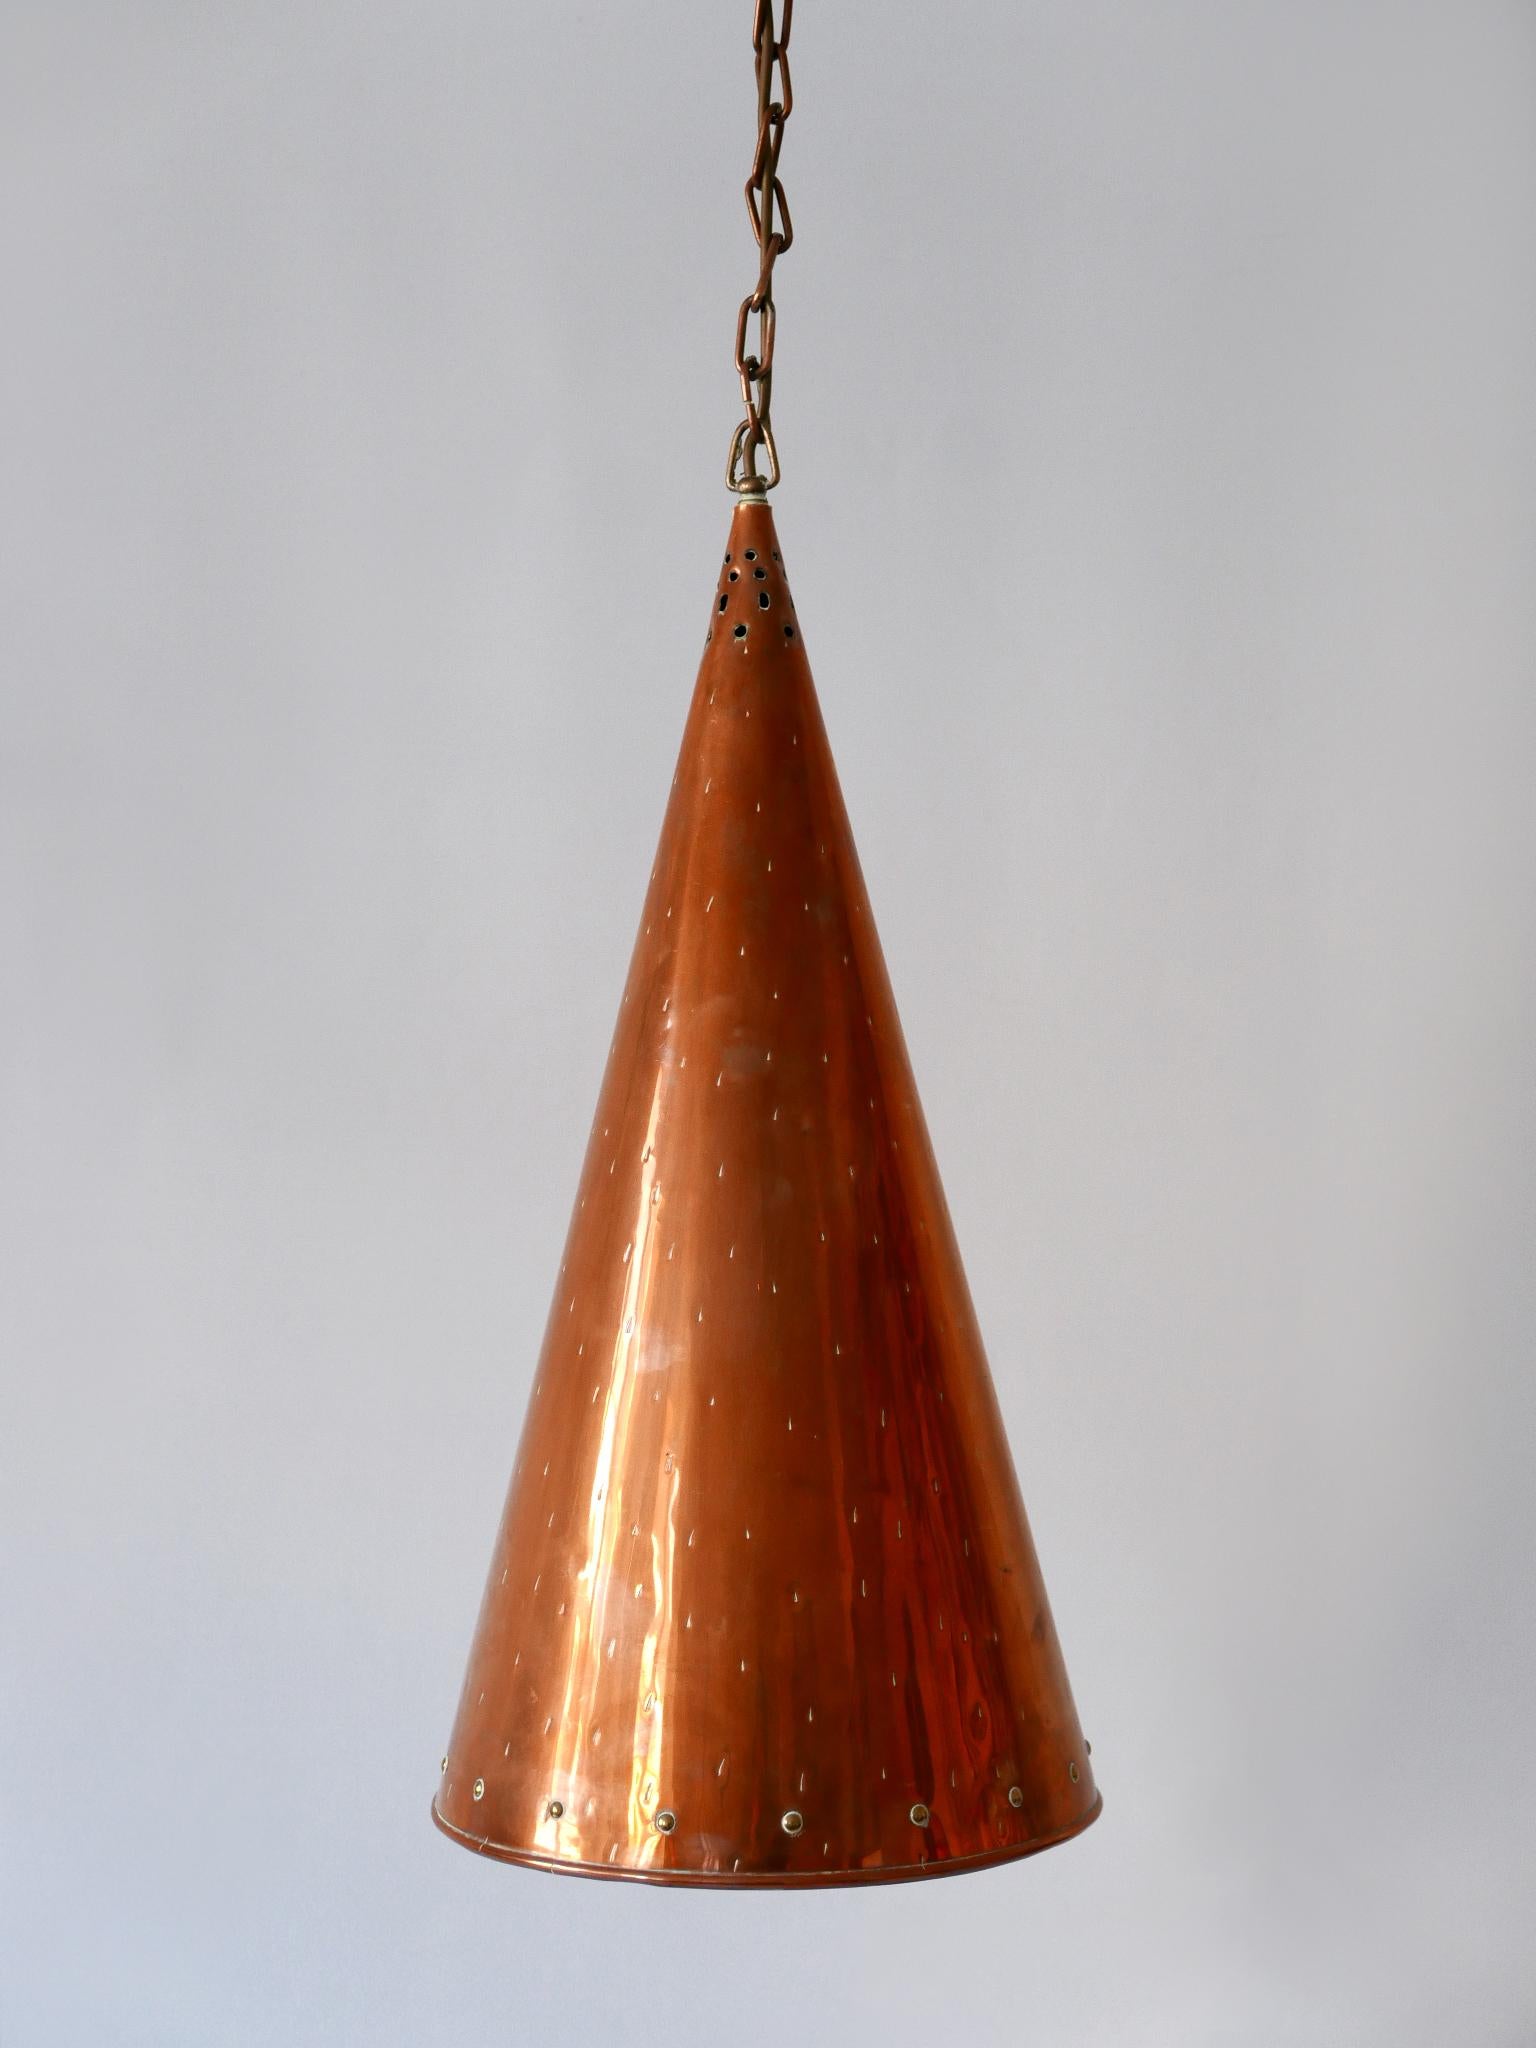 XL Mid Century Modern Copper Pendant Lamp by E.S. Horn Aalestrup Denmark 1950s For Sale 5